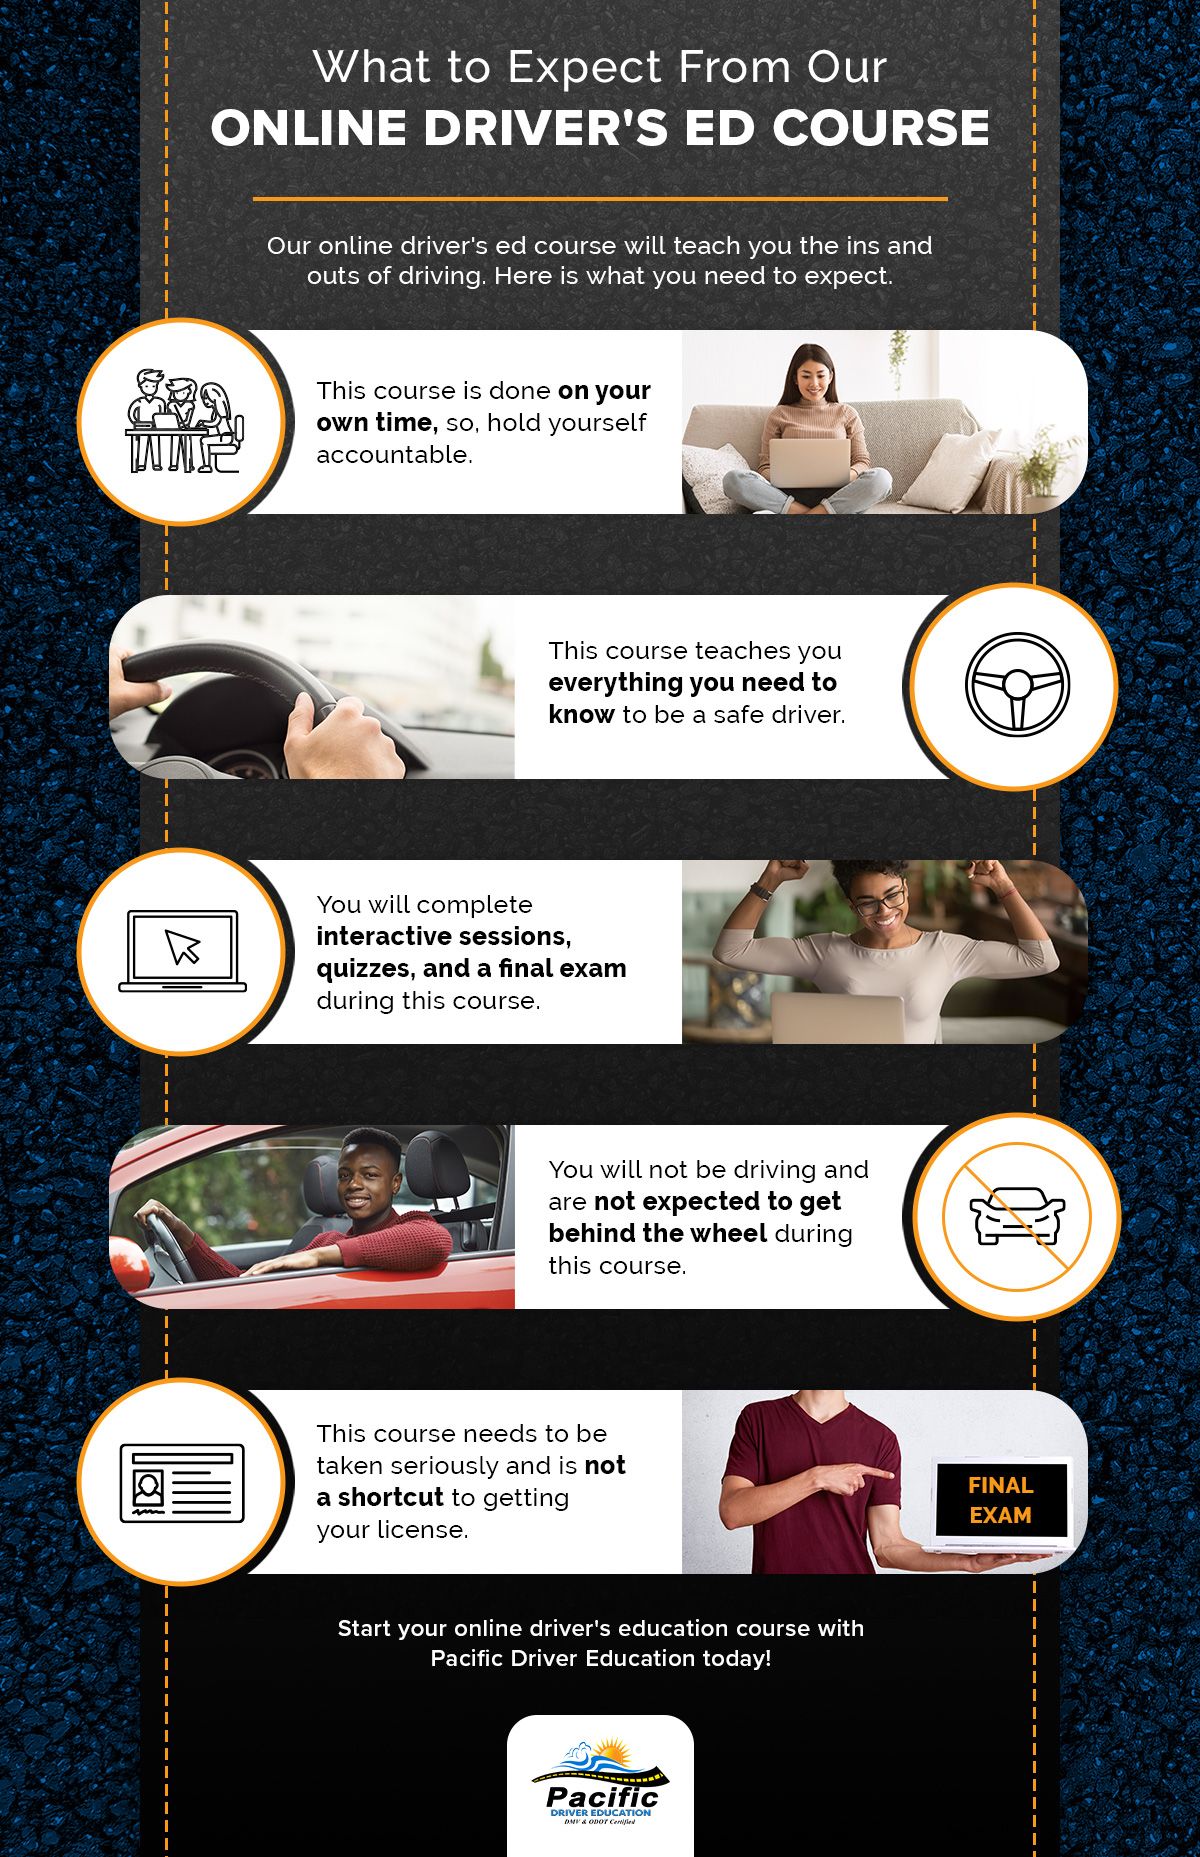 What to Expect From Our Online Driver's Ed Course Infographic